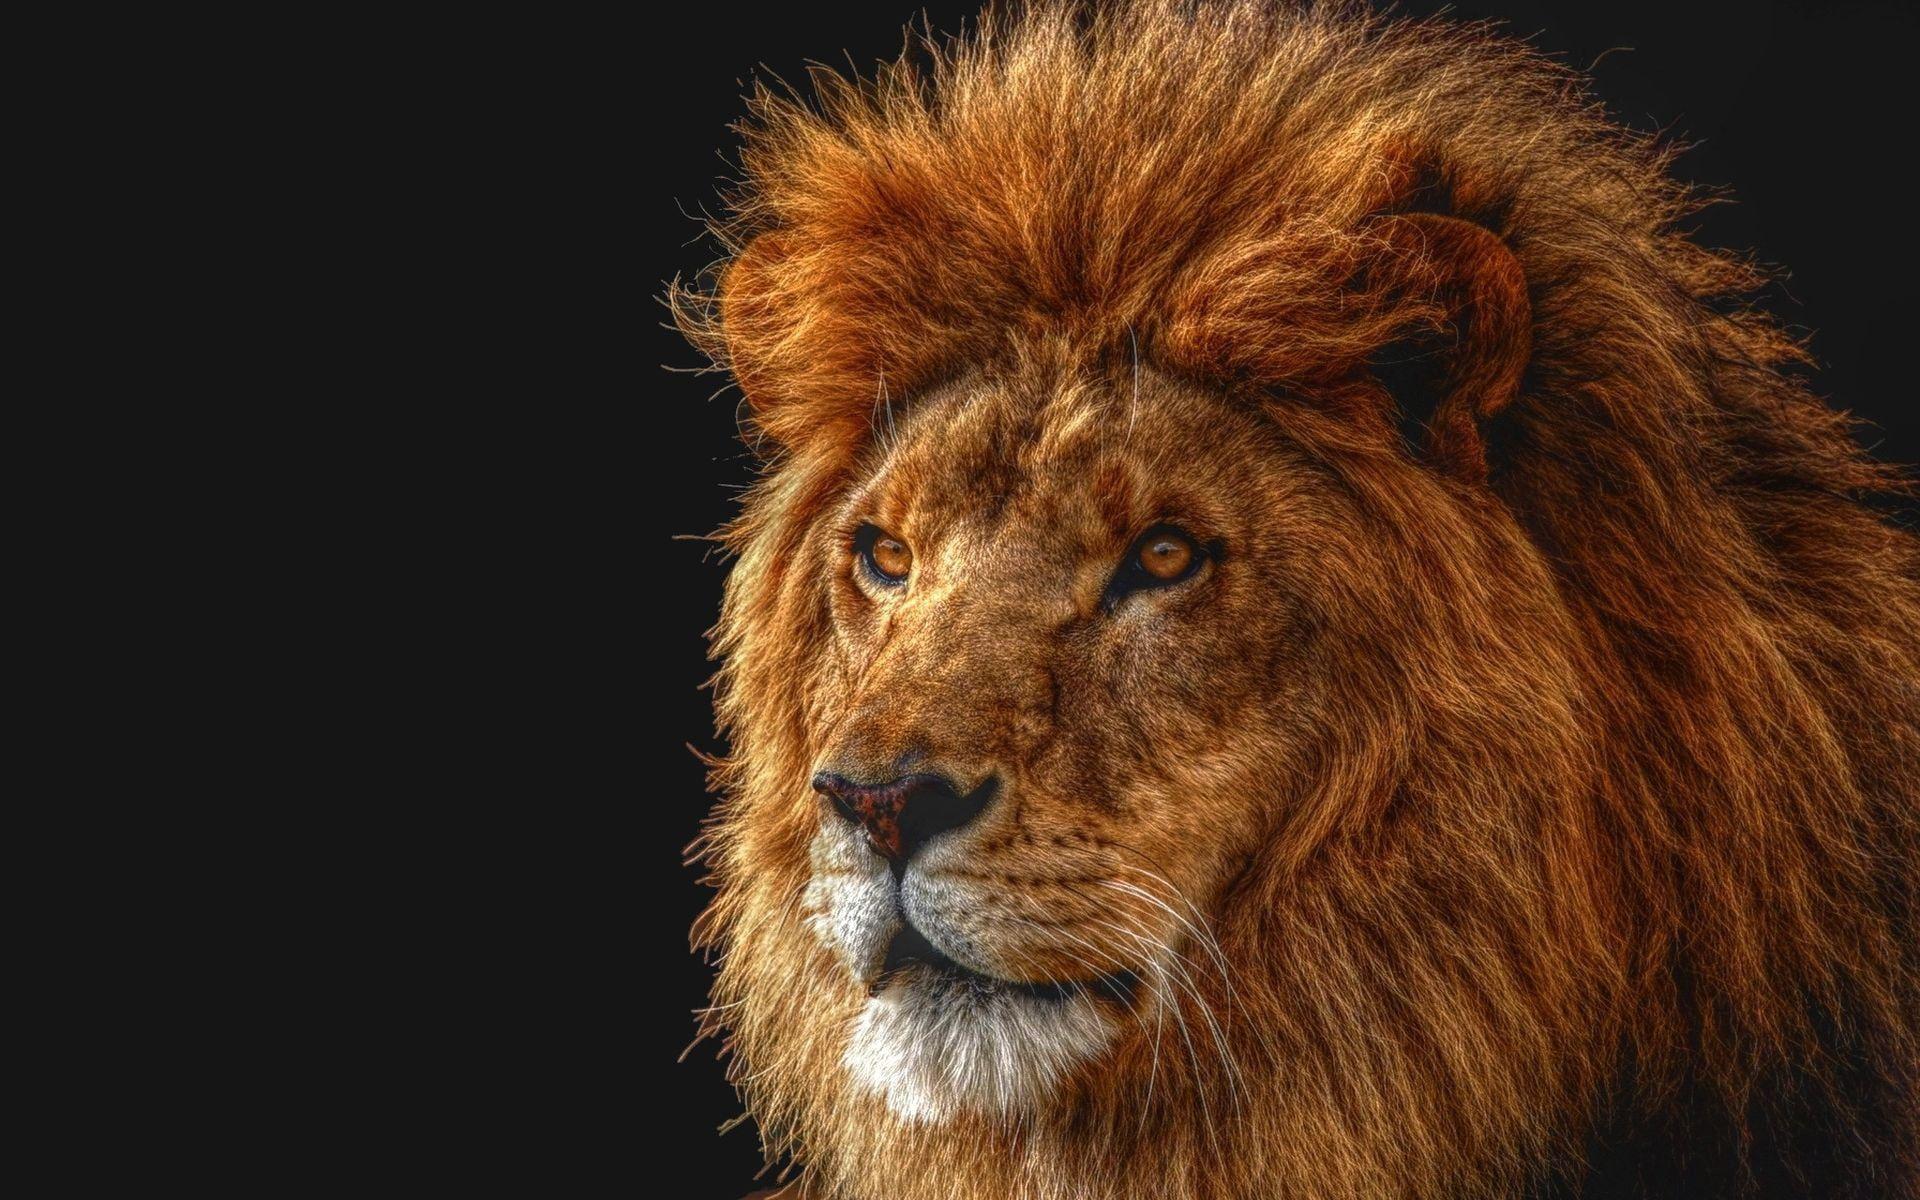 Lion Face Hd Wallpapers - Wallpaper Cave